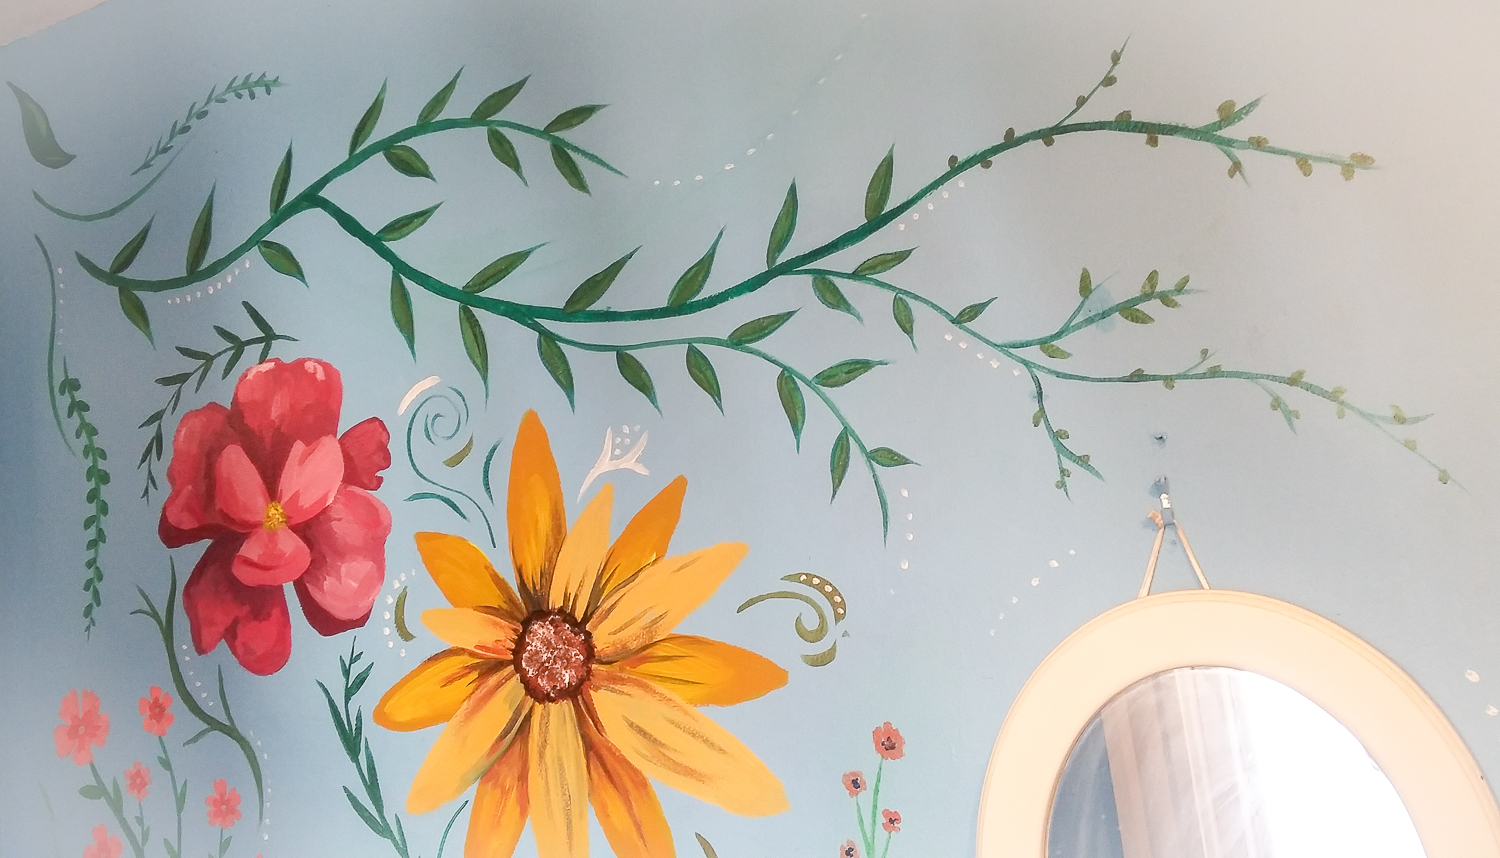 Mural of flowers and vines by Amanda Nahodil